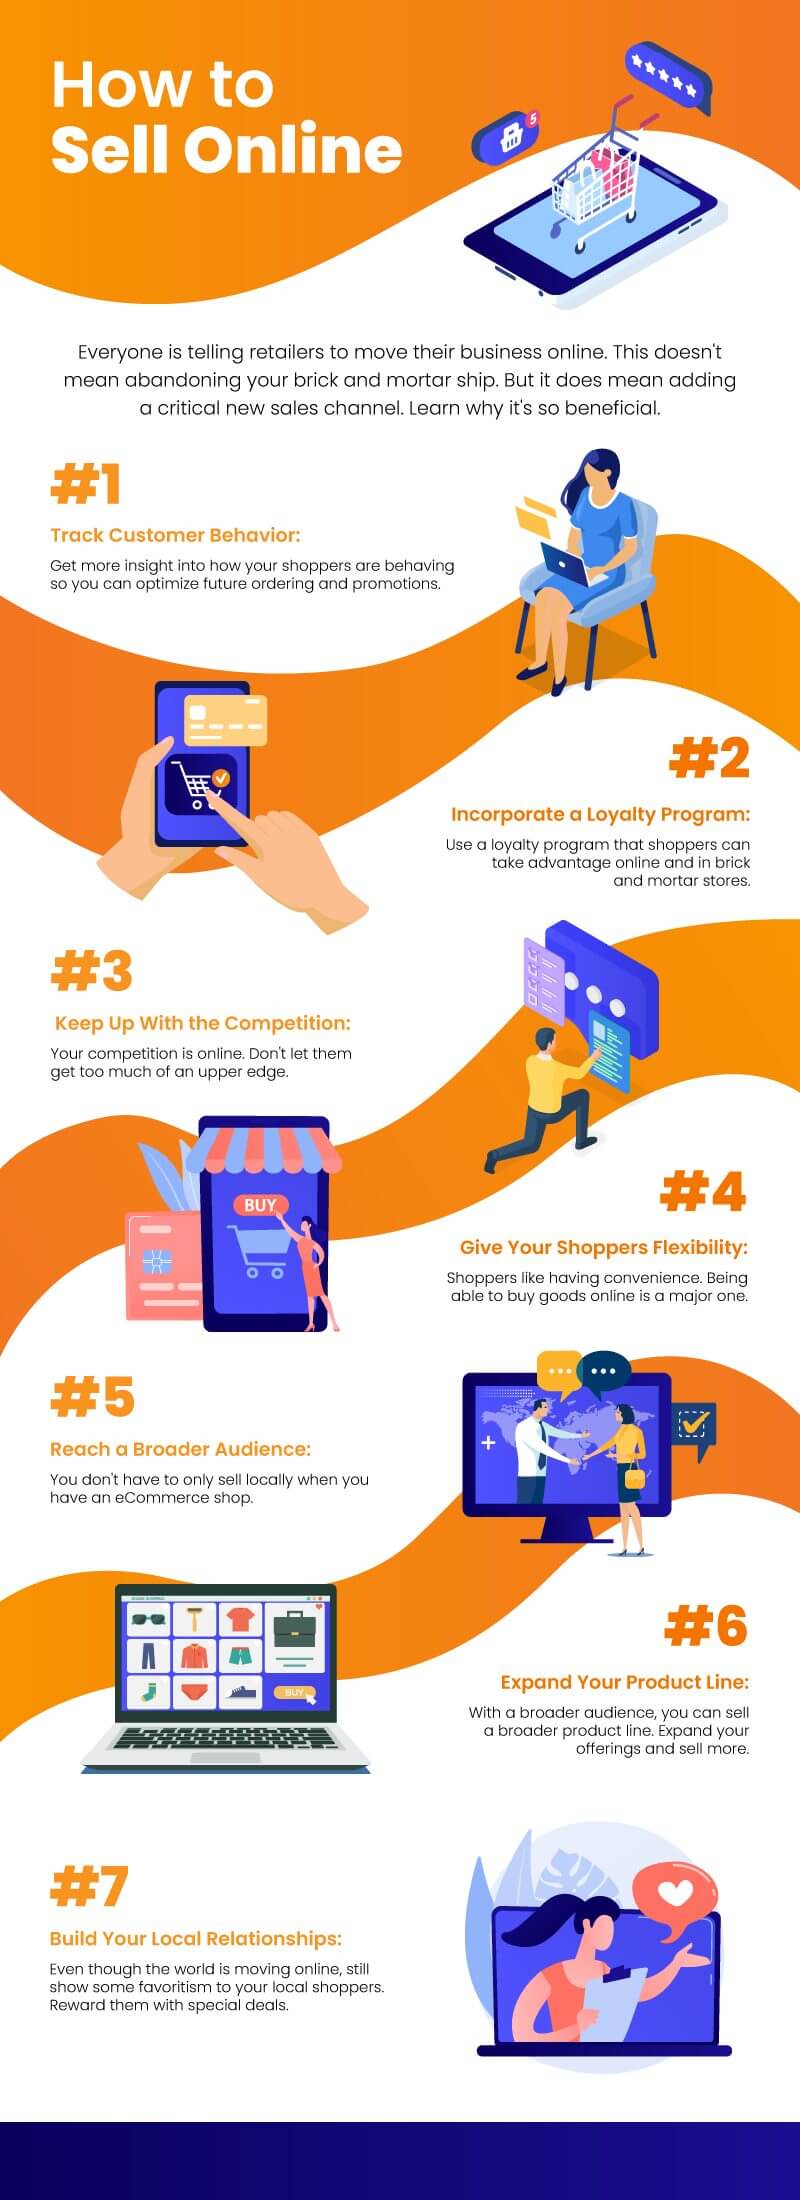 Infographic with 7 ways that help businesses learn how to sell online